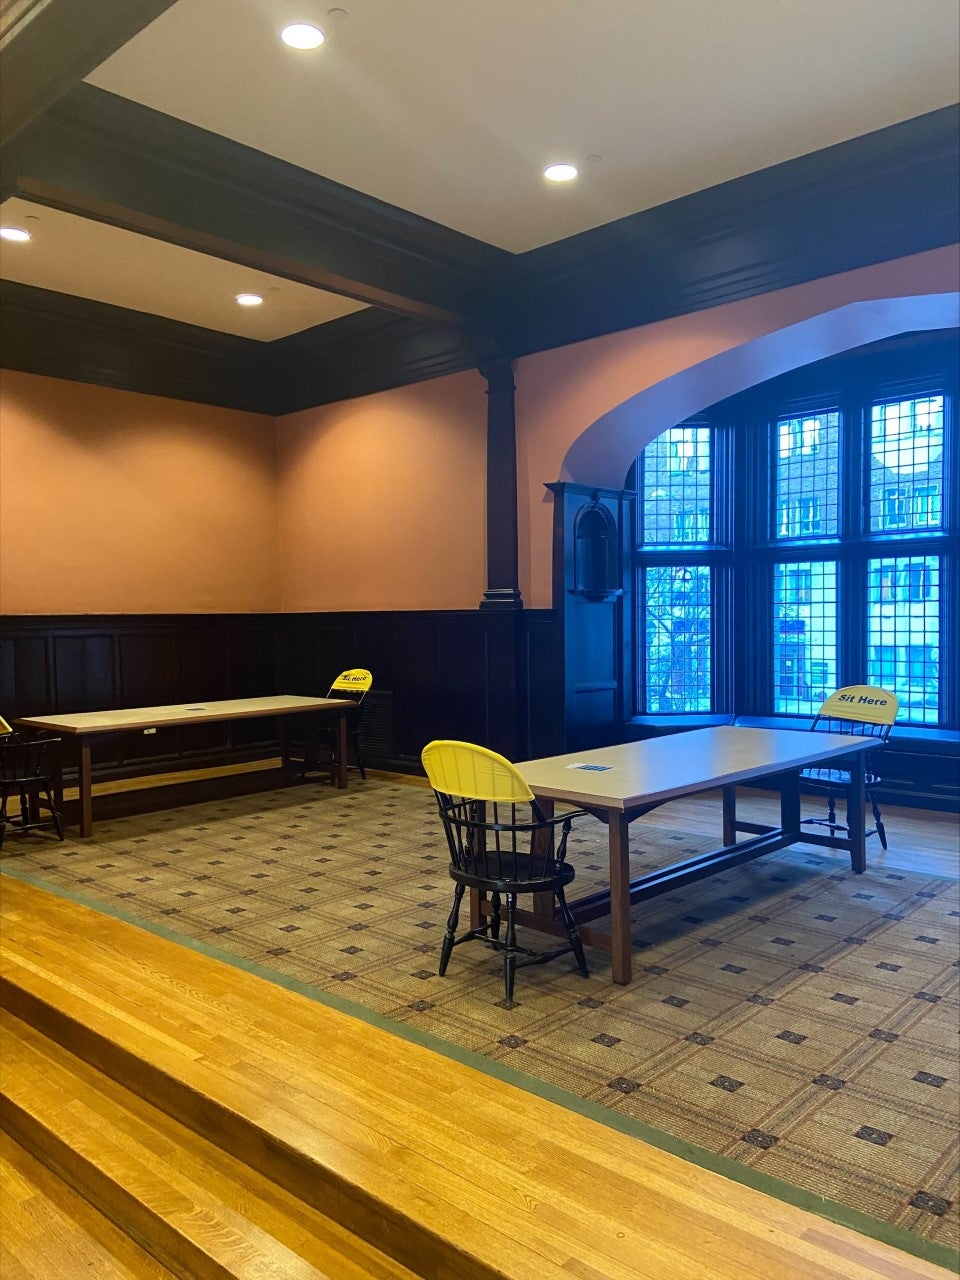 Socially Distanced Study & Lounge Space at Houston Hall Reading Room